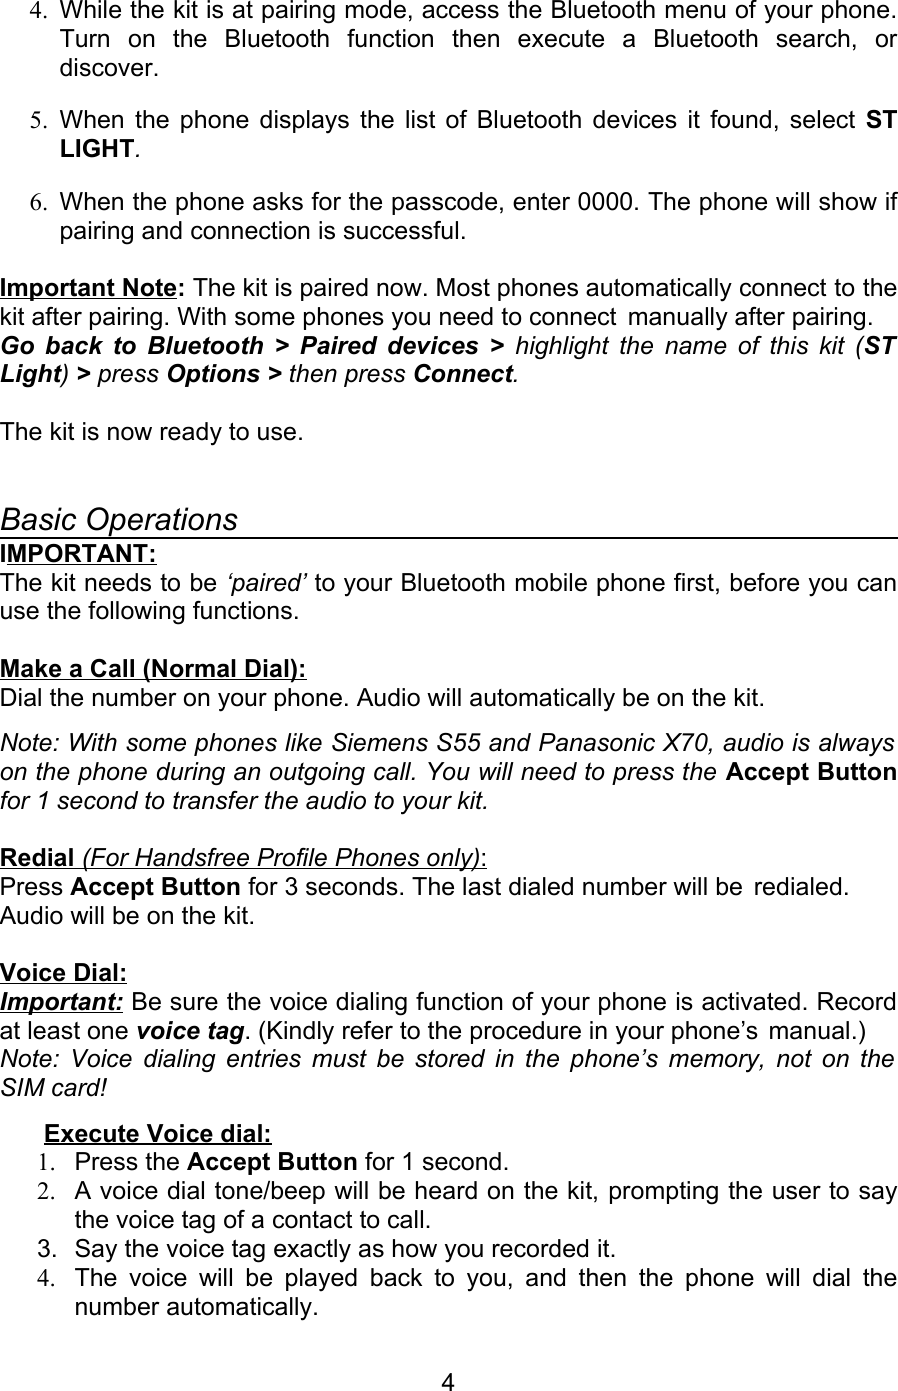 4. While the kit is at pairing mode, access the Bluetooth menu of your phone. Turn   on   the   Bluetooth   function   then   execute   a   Bluetooth   search,   or discover. 5. When the phone displays the list of Bluetooth devices it found, select  ST LIGHT.6. When the phone asks for the passcode, enter 0000. The phone will show if pairing and connection is successful.  Important Note: The kit is paired now. Most phones automatically connect to the kit after pairing. With some phones you need to connect  manually after pairing.Go back to Bluetooth &gt; Paired devices &gt;  highlight the name of this kit (ST  Light) &gt; press Options &gt; then press Connect. The kit is now ready to use.           Basic OperationsIMPORTANT:The kit needs to be ‘paired’ to your Bluetooth mobile phone first, before you can use the following functions. Make a Call (Normal Dial): Dial the number on your phone. Audio will automatically be on the kit.Note: With some phones like Siemens S55 and Panasonic X70, audio is always  on the phone during an outgoing call. You will need to press the Accept Button for 1 second to transfer the audio to your kit. Redial    (For Handsfree Profile Phones only)   :  Press Accept Button for 3 seconds. The last dialed number will be  redialed. Audio will be on the kit.Voice Dial: Important: Be sure the voice dialing function of your phone is activated. Record at least one voice tag. (Kindly refer to the procedure in your phone’s  manual.) Note: Voice dialing entries must be stored in the phone’s memory, not on the SIM card!  Execute Voice dial:1. Press the Accept Button for 1 second.2. A voice dial tone/beep will be heard on the kit, prompting the user to say the voice tag of a contact to call.3. Say the voice tag exactly as how you recorded it. 4. The voice will be played back to you, and then the phone will dial the number automatically.4